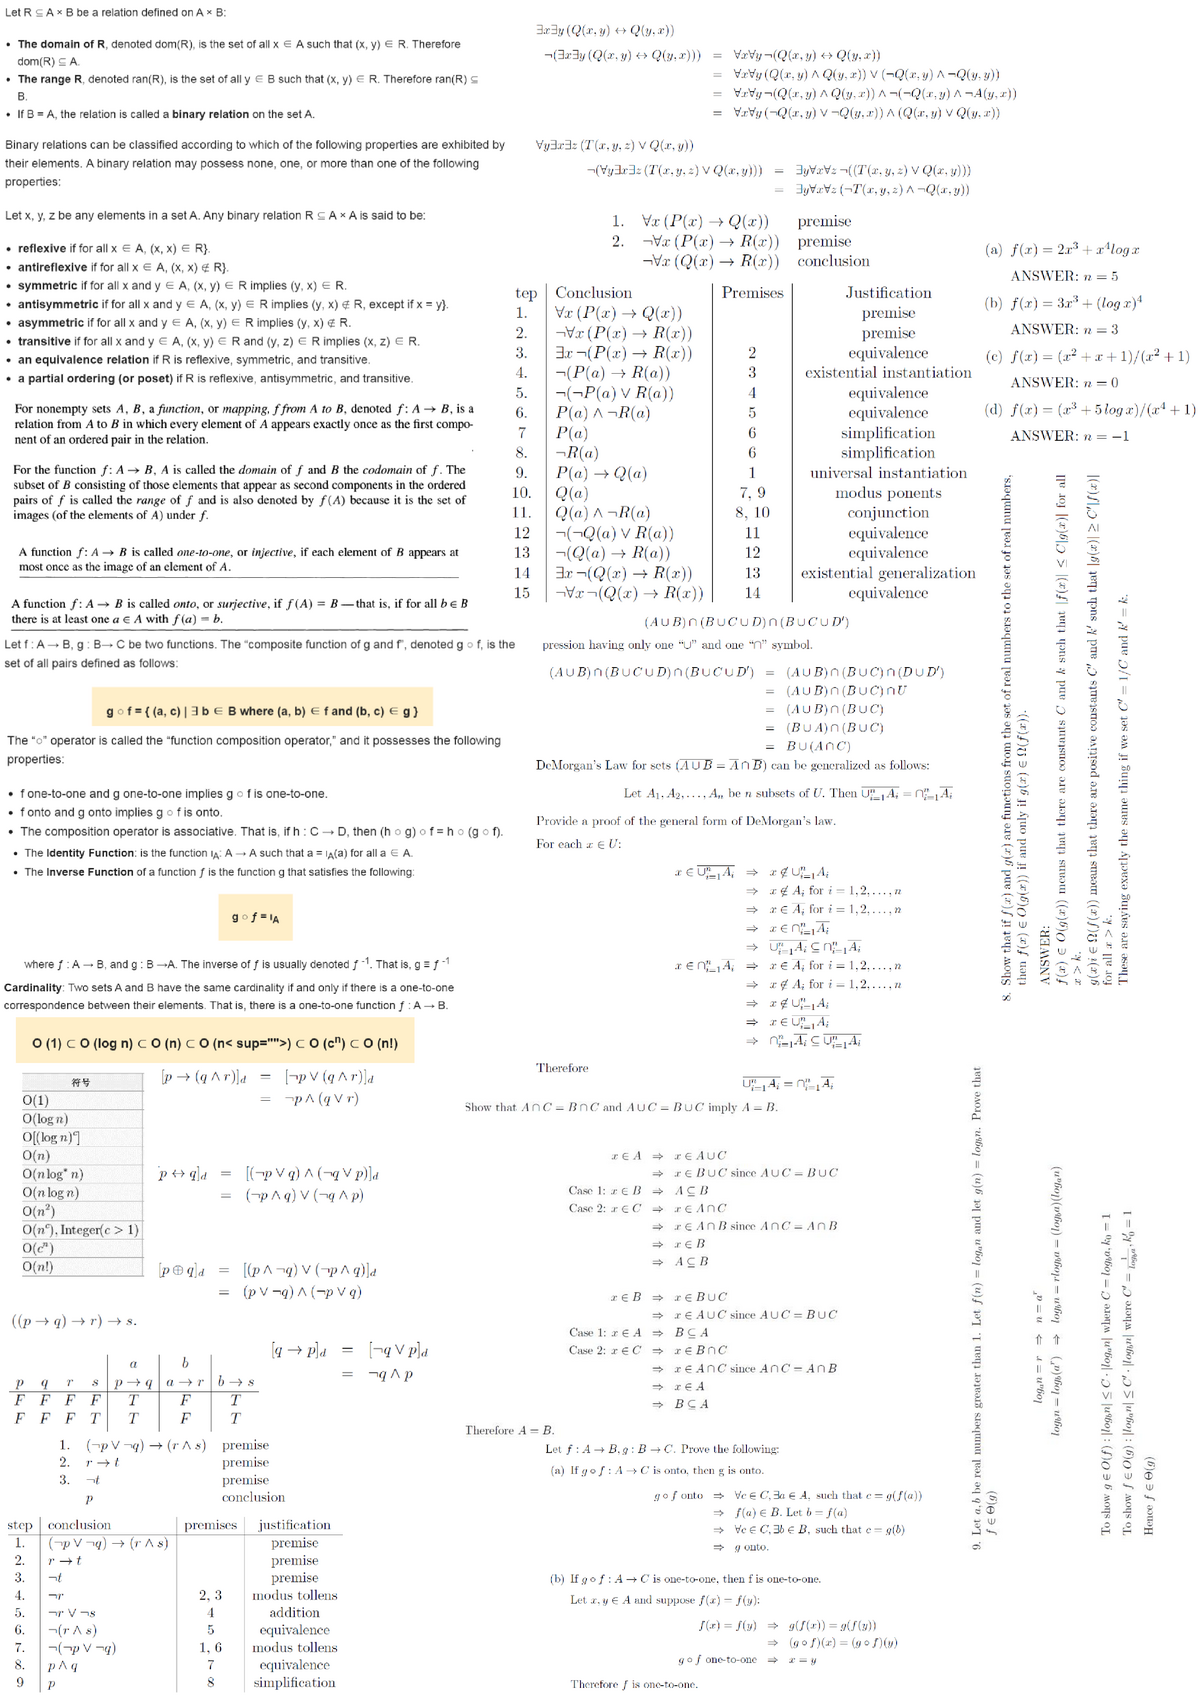 sequences and series cheat sheet